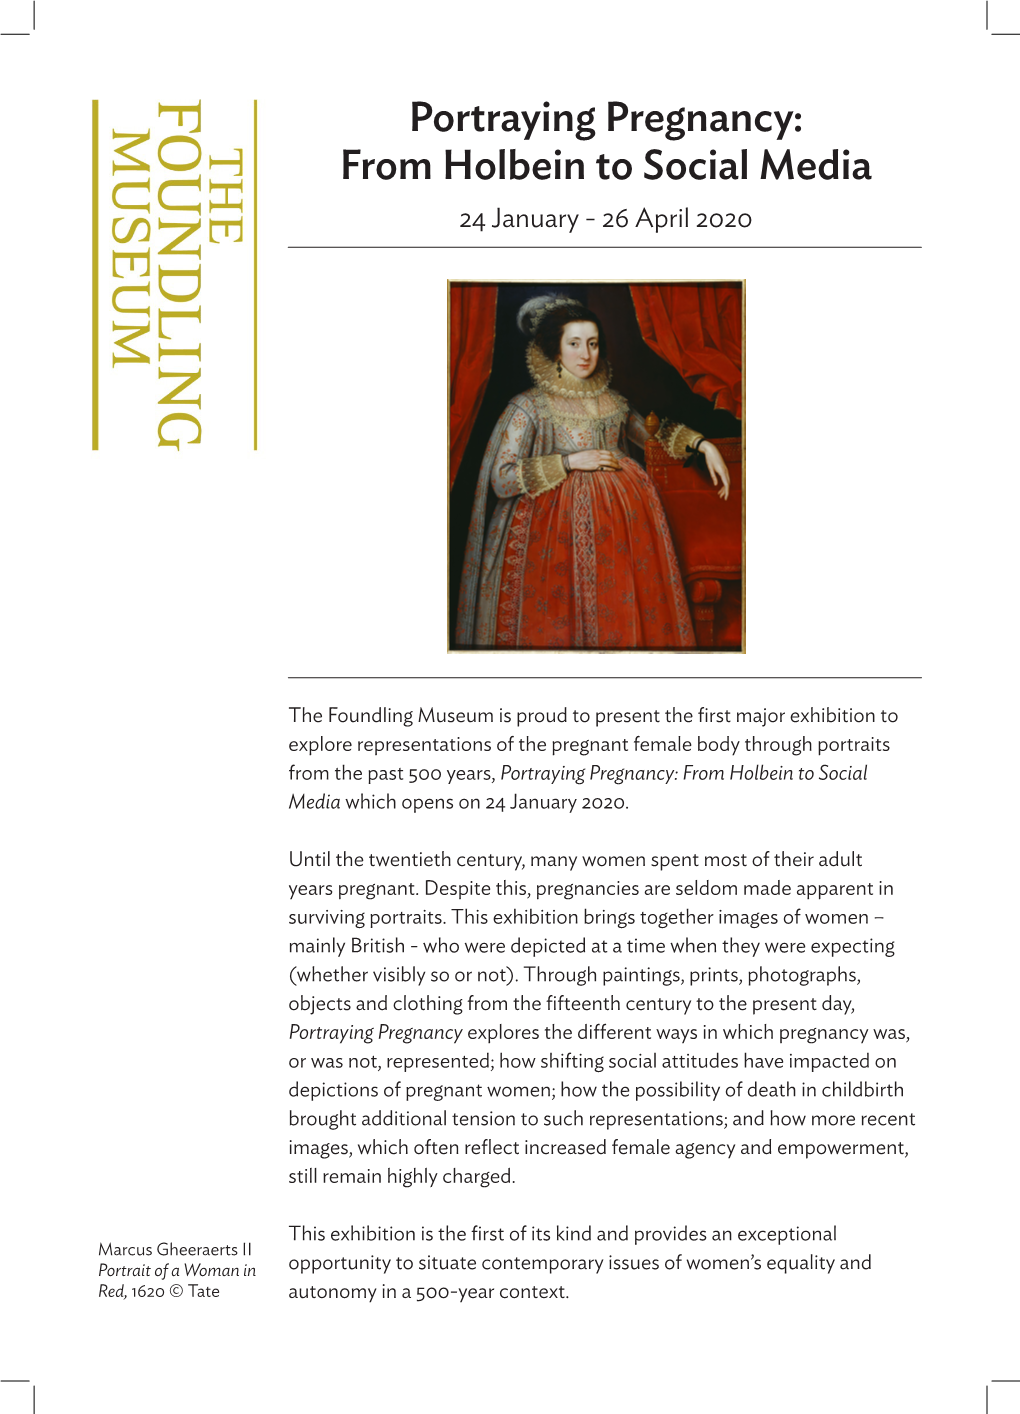 Portraying Pregnancy: from Holbein to Social Media 24 January - 26 April 2020